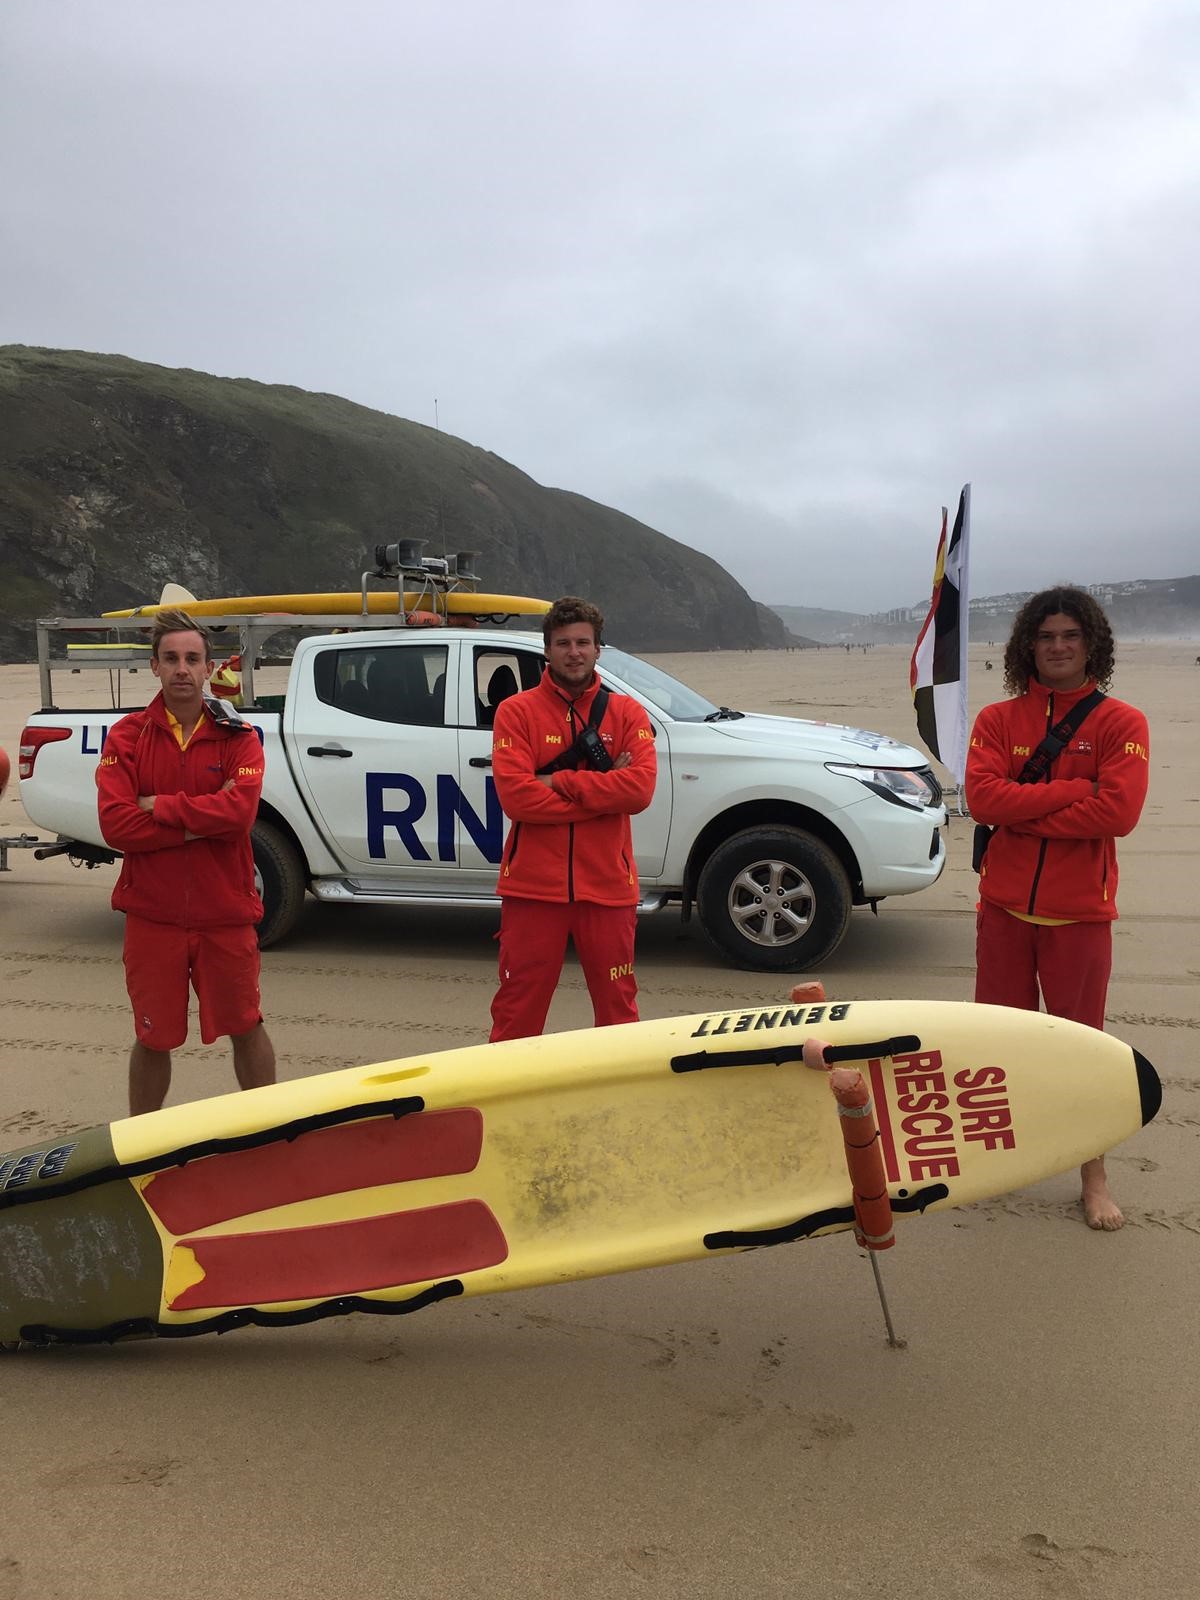 Lifeguards Tomo Harder, Charley Florey and Ben Evans after Saturday's rescue (RNLI/PA)